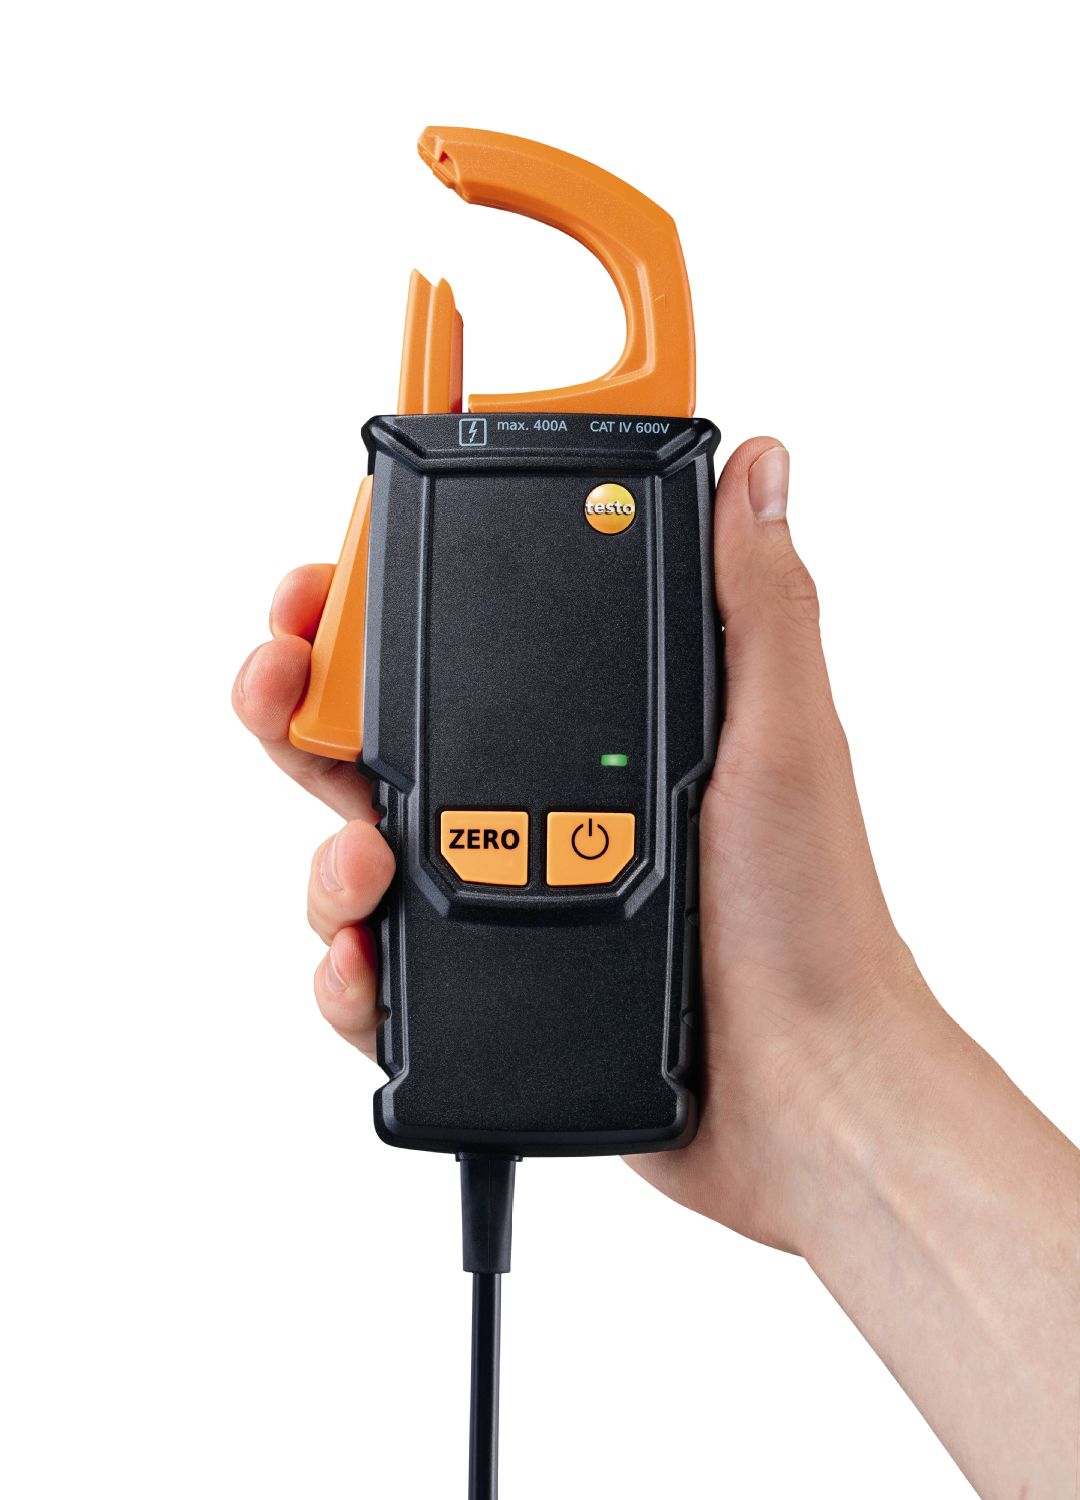 Clamp meter adapter - for non-contact current measurement